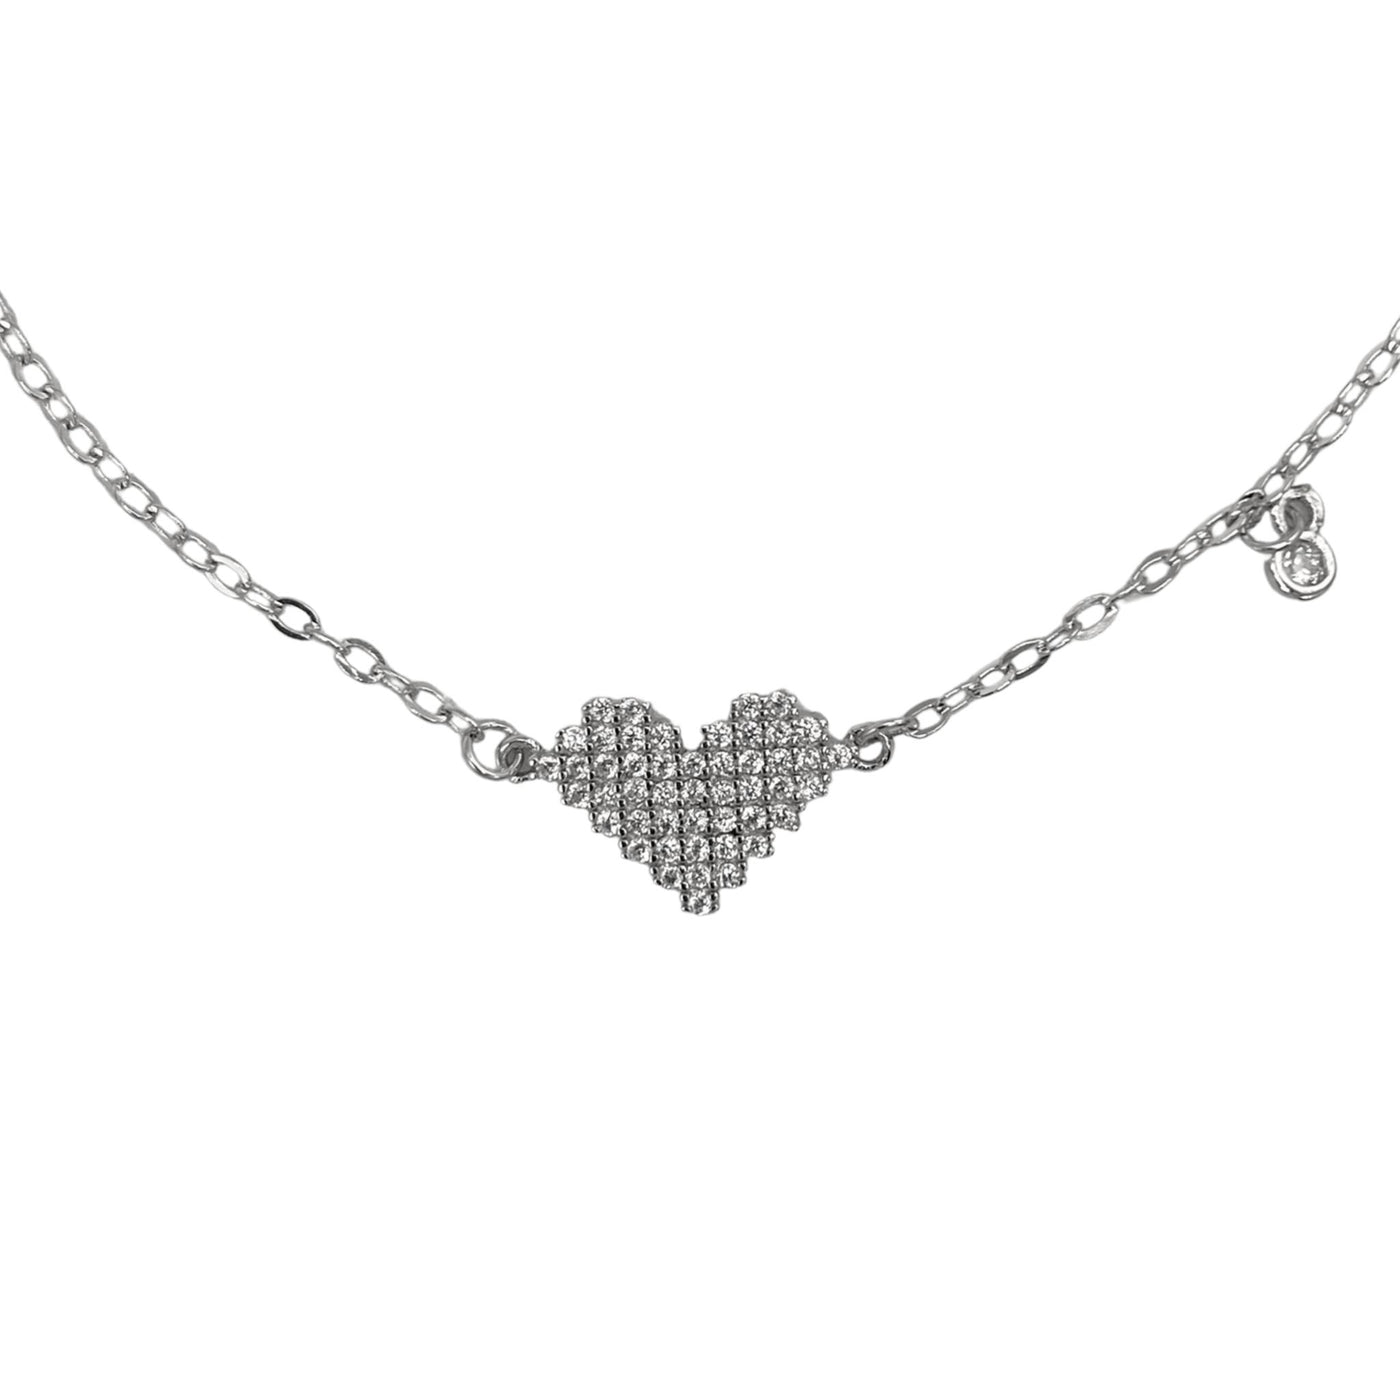 Silver bracelet with central heart and charm